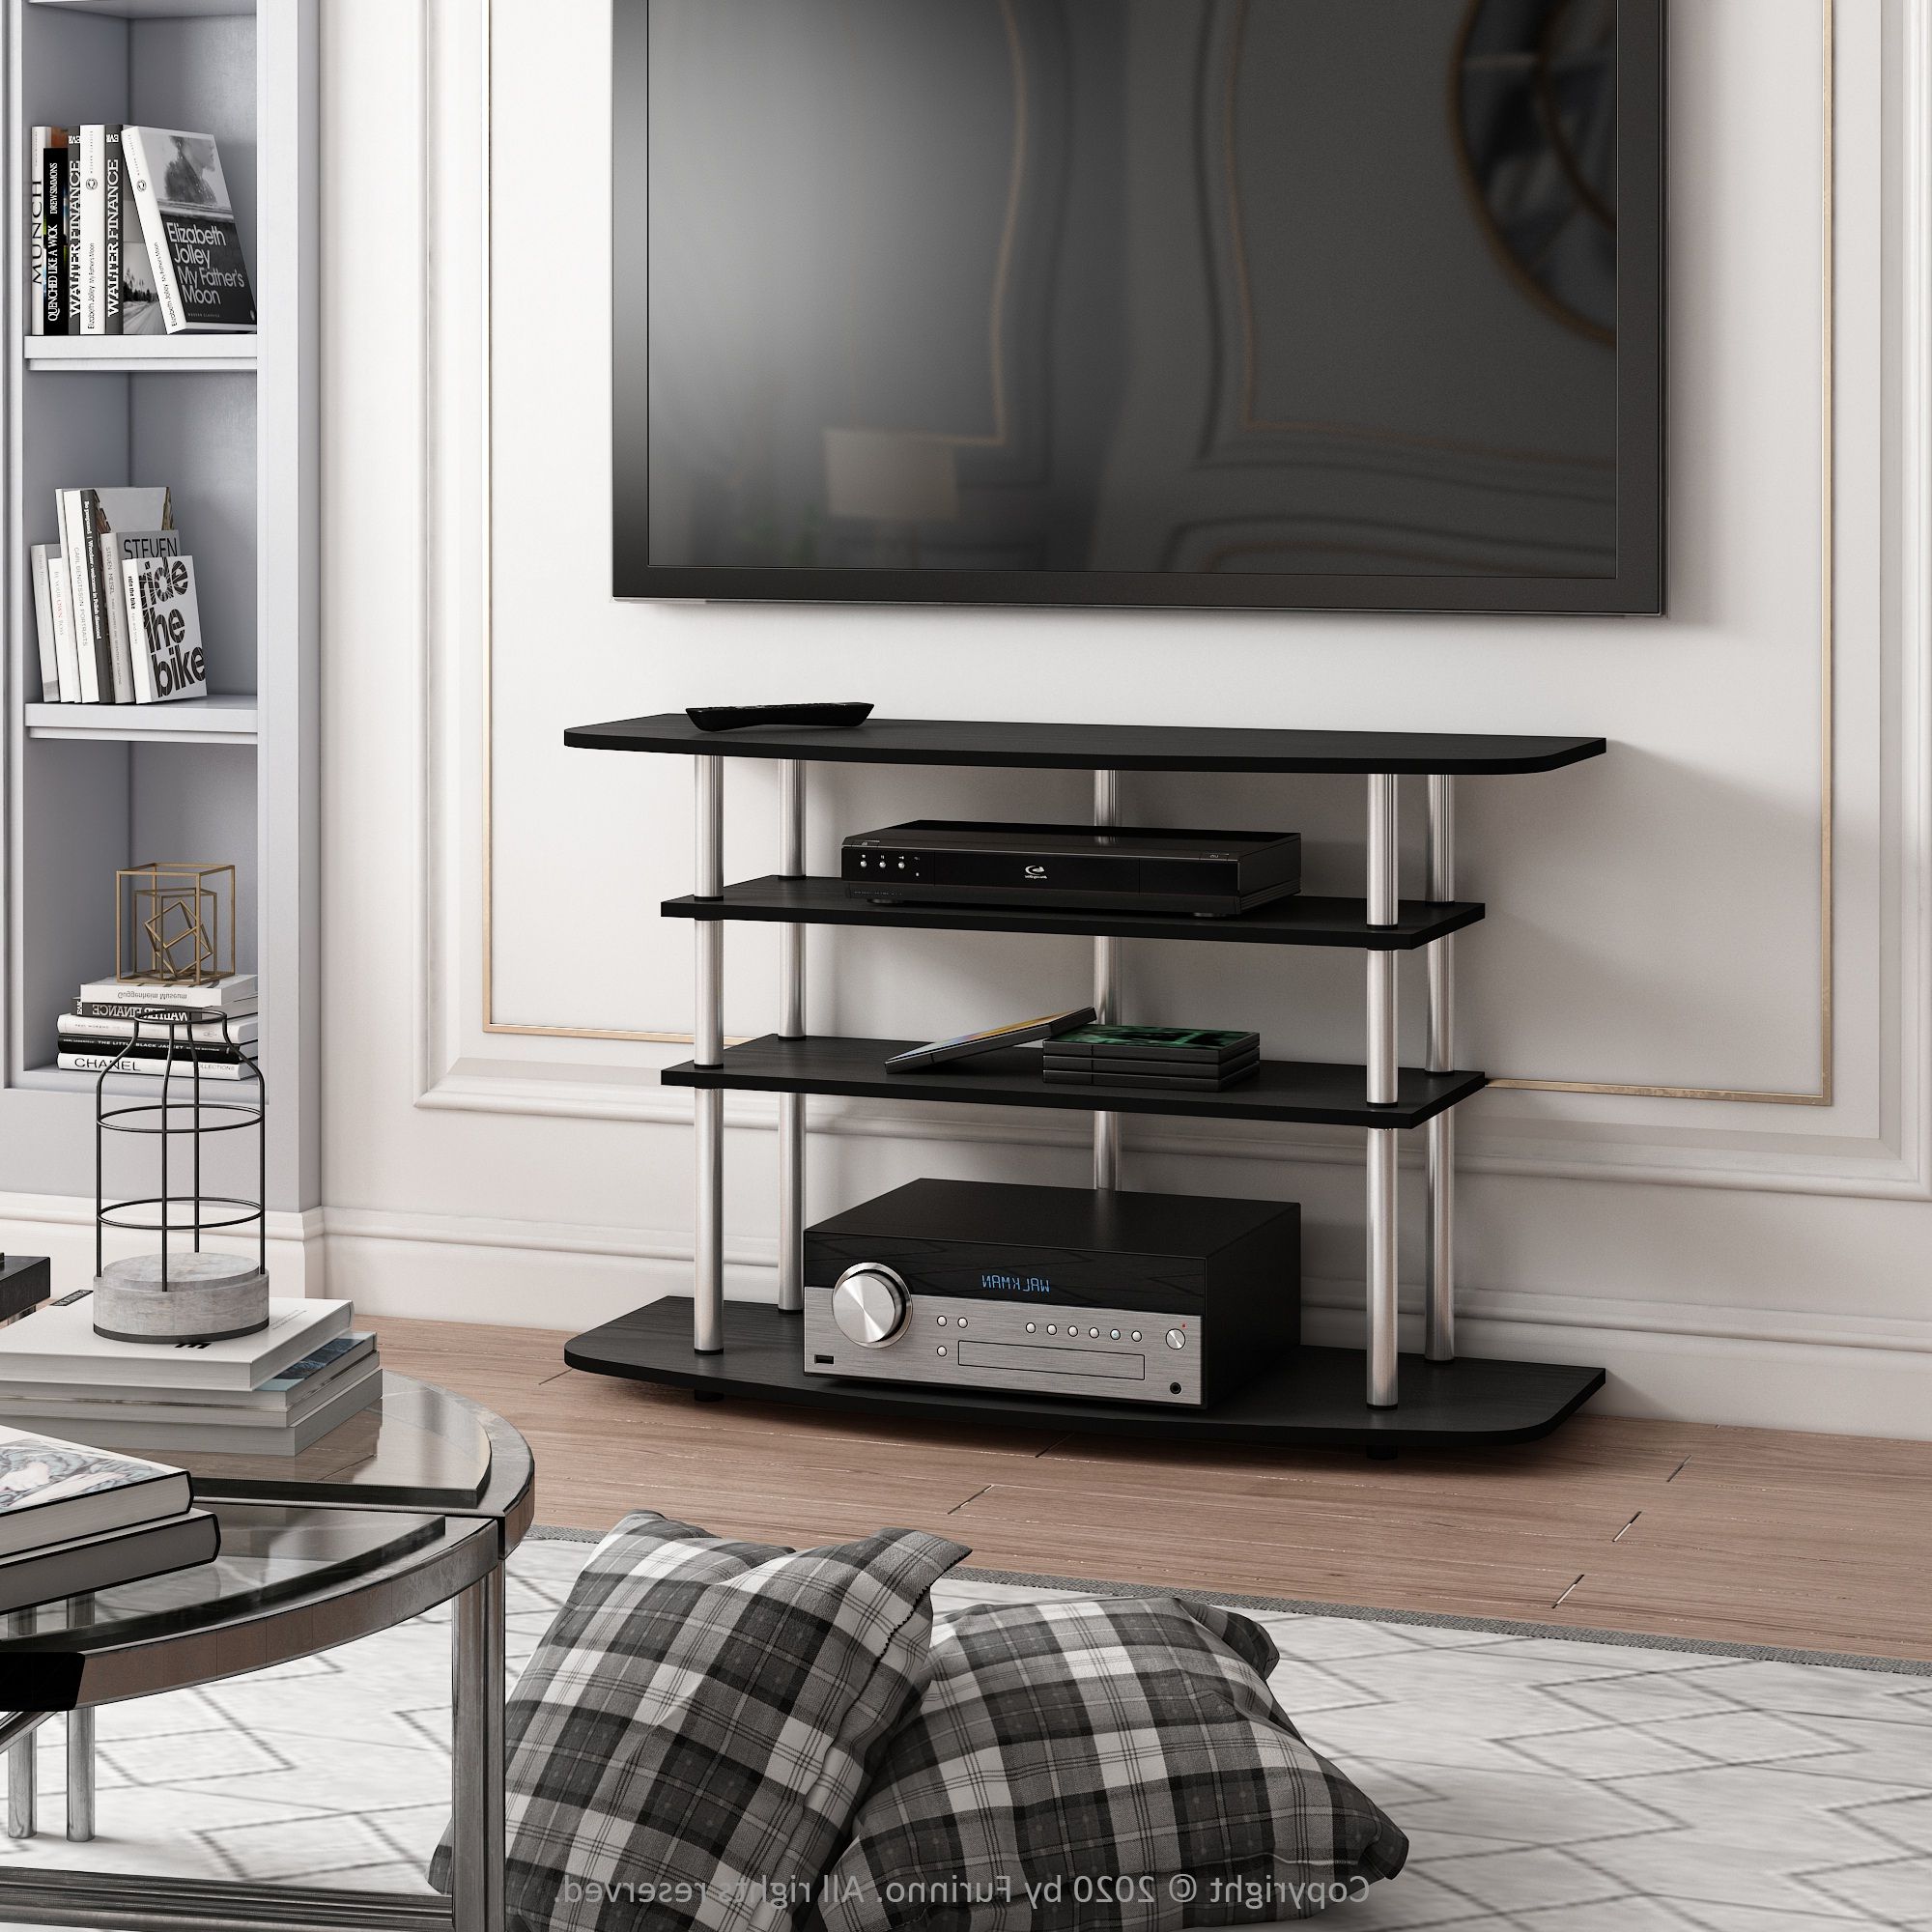 Furinno Frans Turn N Tube 4 Tier Tv Stand For Tv Up To 46 Within Fashionable Furinno Jaya Large Tv Stands With Storage Bin (View 9 of 10)